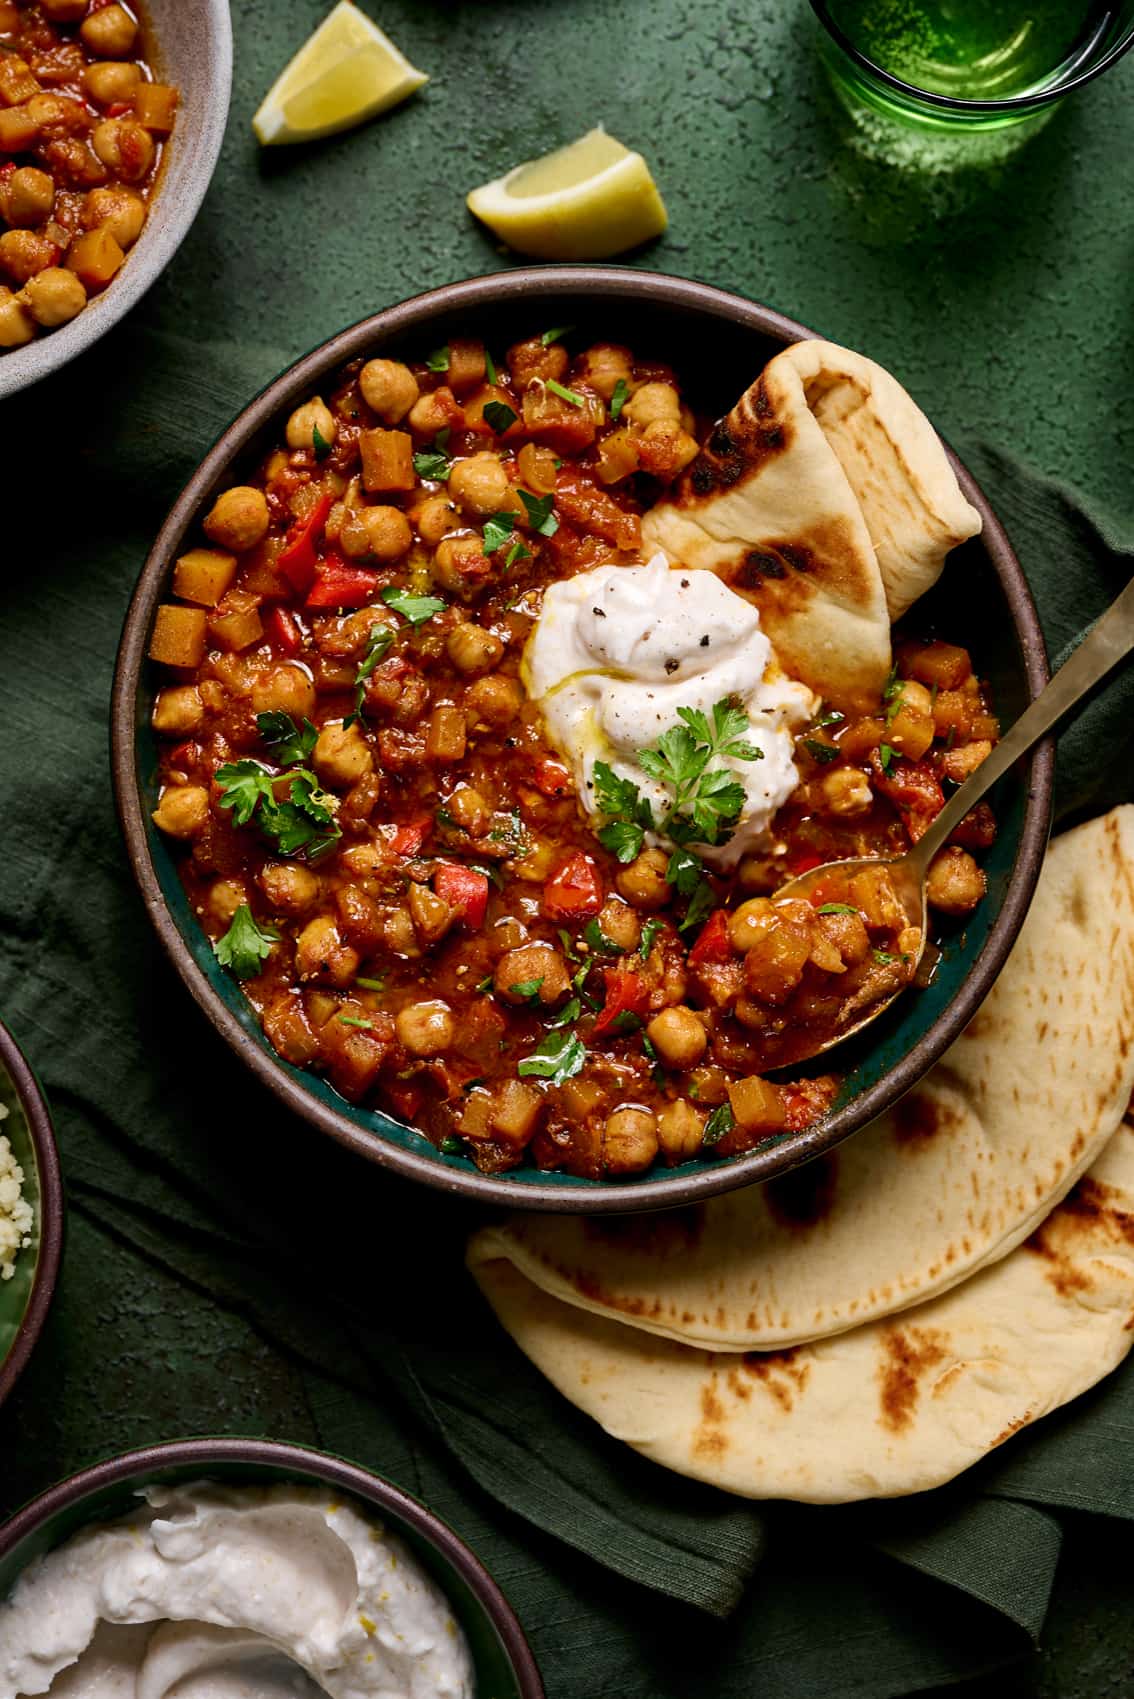 A bowl of chickpea stew with tzatziki sauce and pita bread.